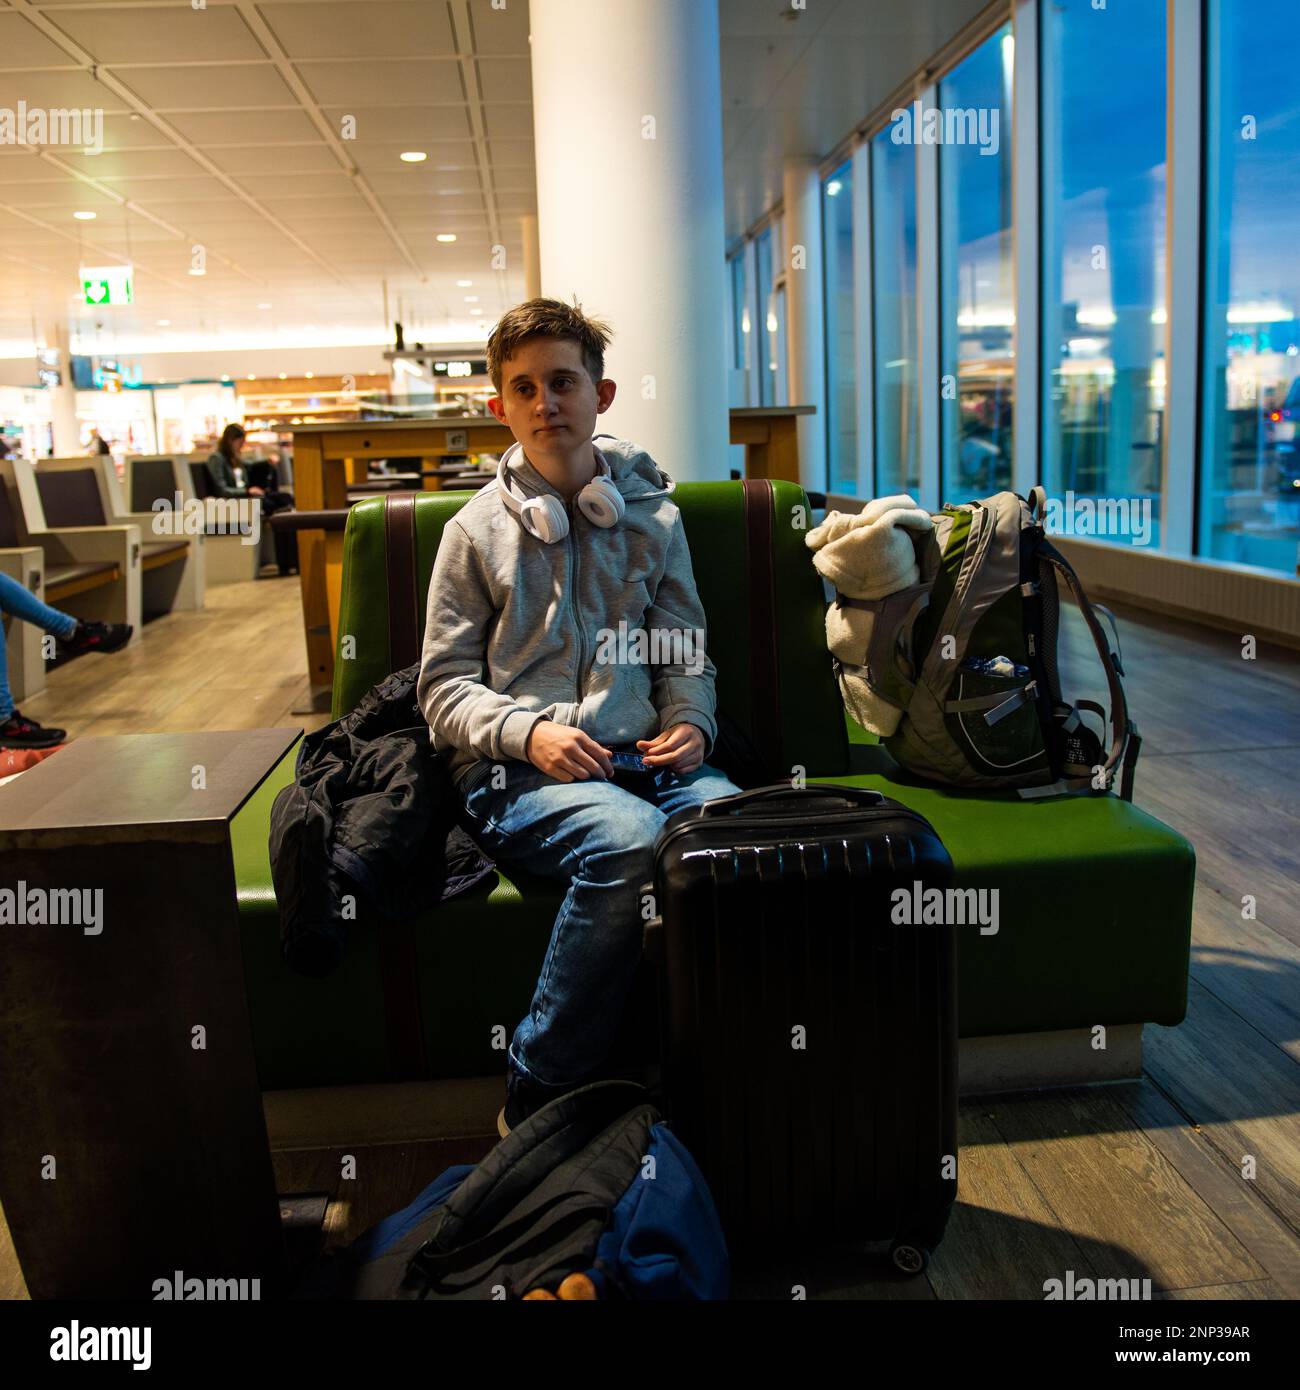 A young man waits for his flight to be announced at an airport Stock Photo